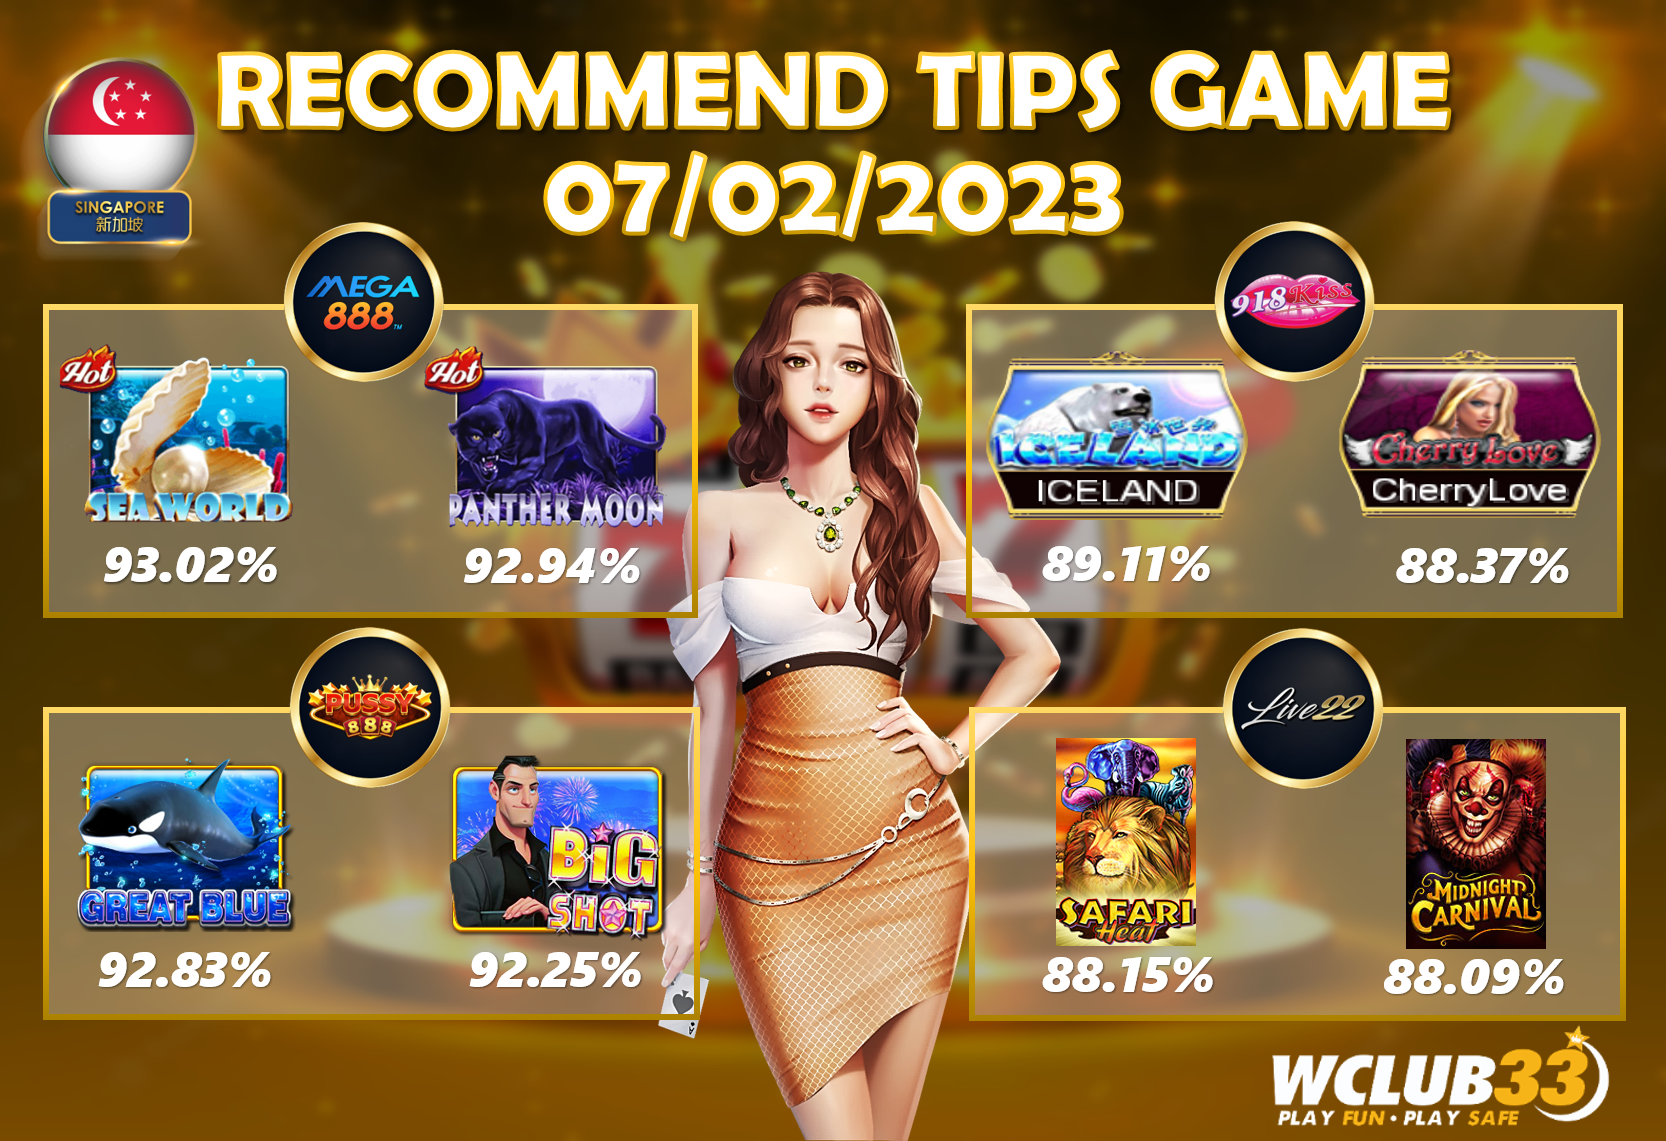 UPDATE TIPS GAME 07/02